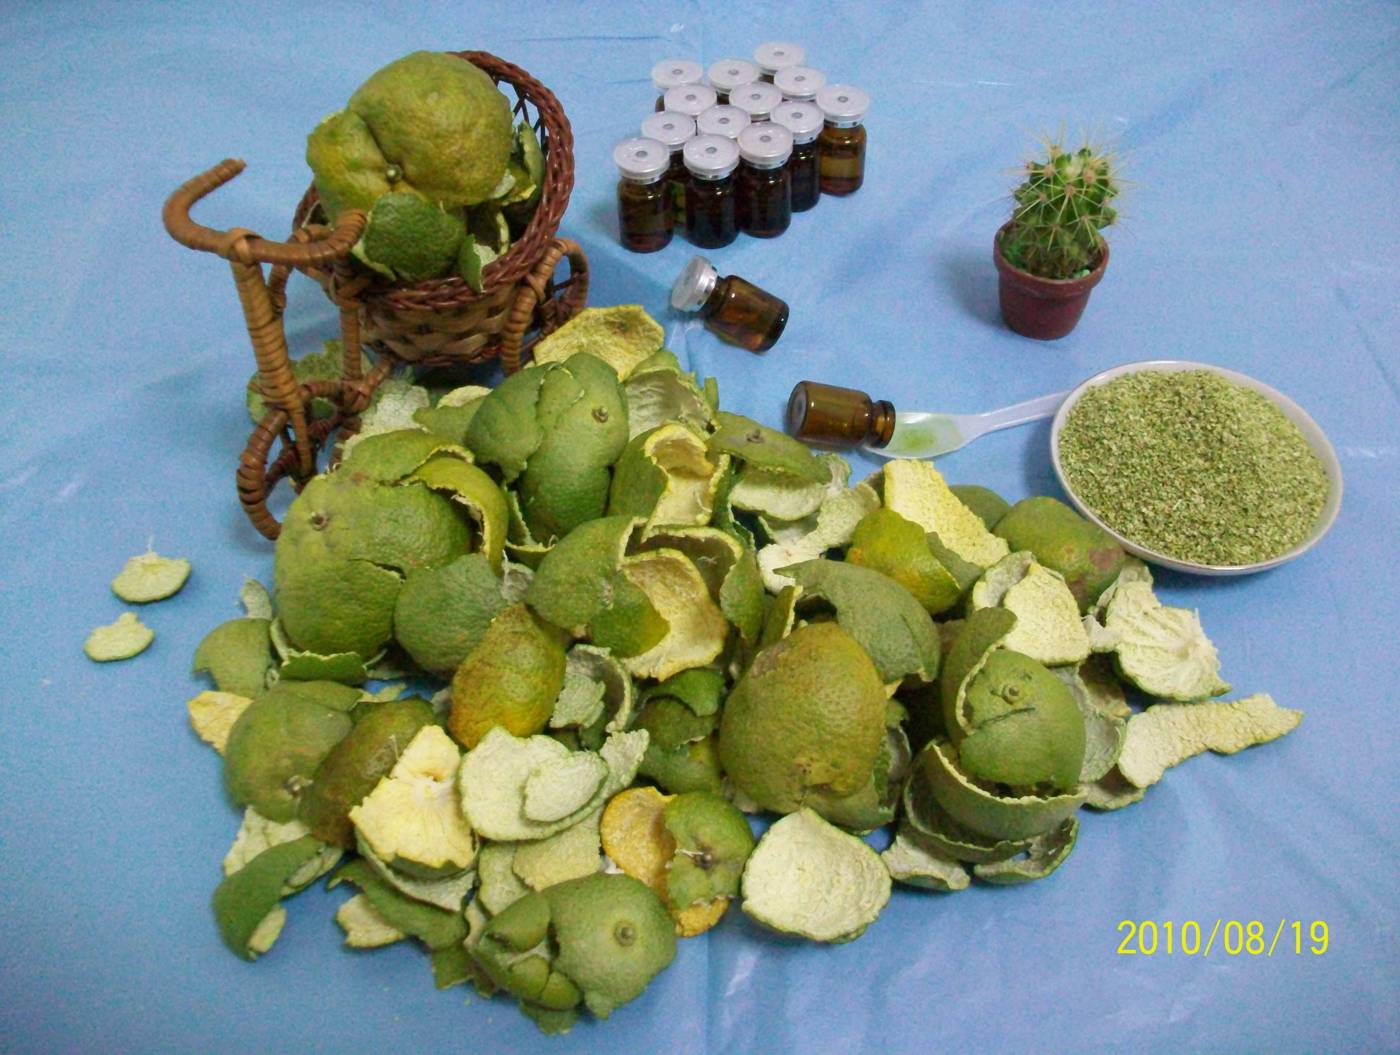 The Citrus depressa Hayata product made using the supercritical carbon dioxide fluid extraction technology photo